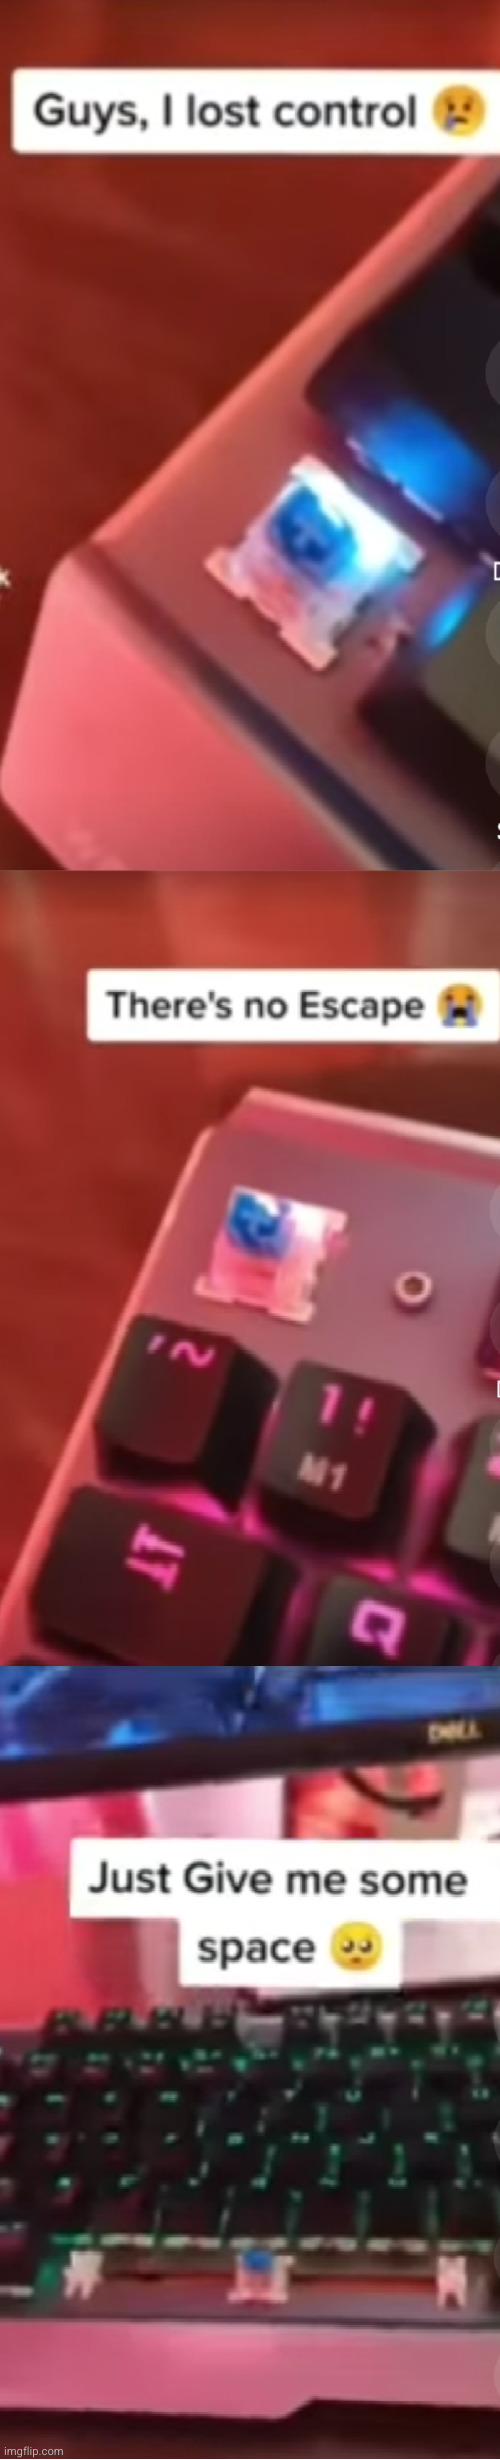 relatable bro :,( | image tagged in computer,escape,control,space,keyboard,relatable | made w/ Imgflip meme maker